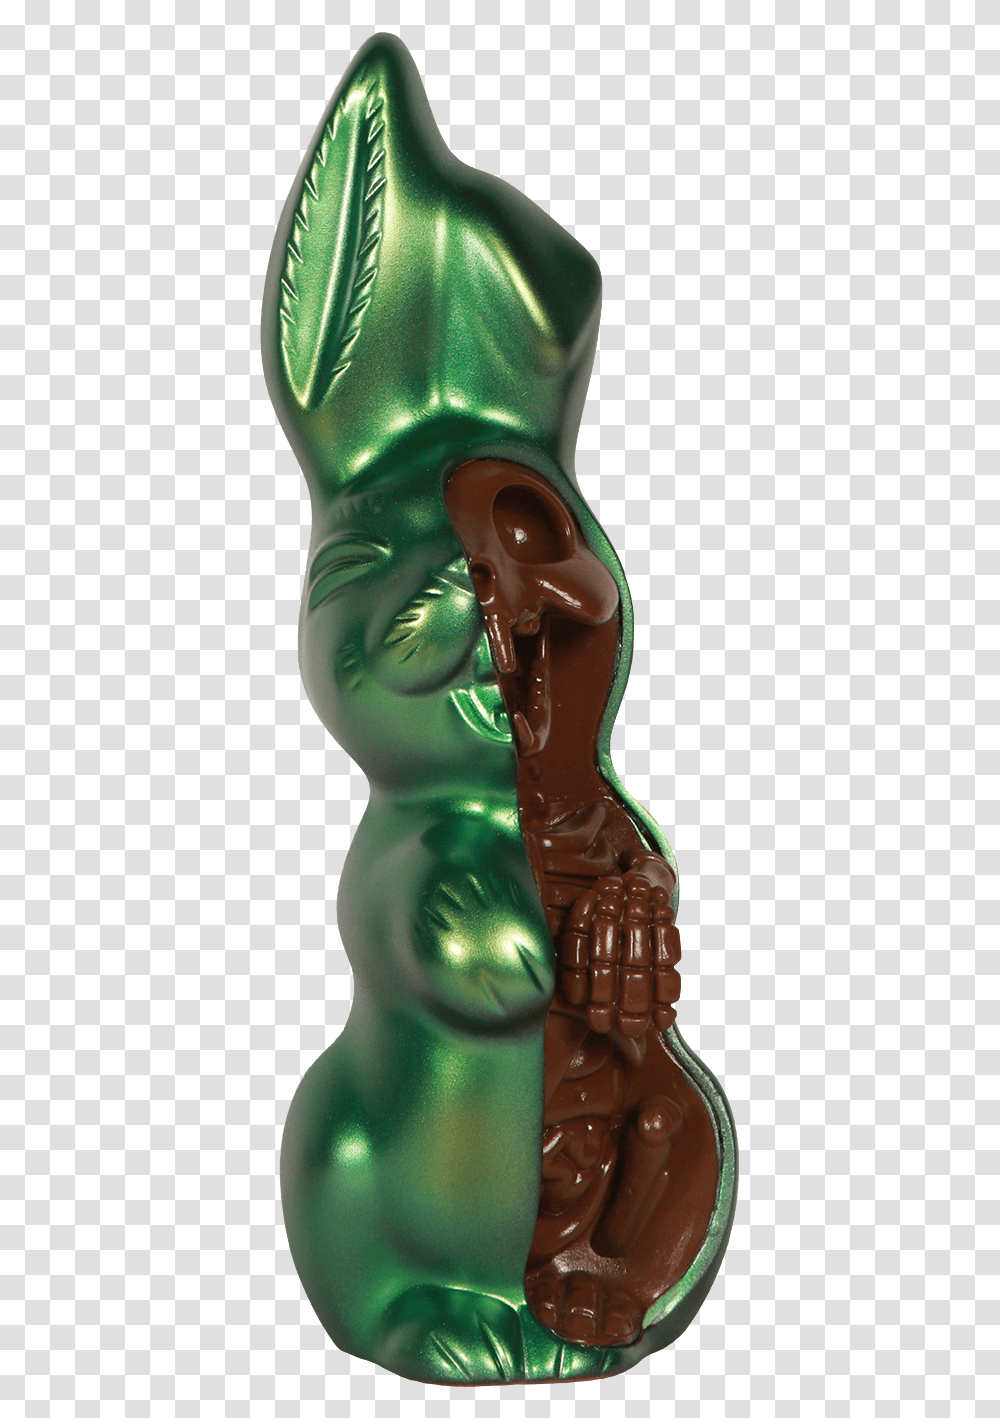 Chocolate Bunny, Sweets, Food, Dessert, Figurine Transparent Png